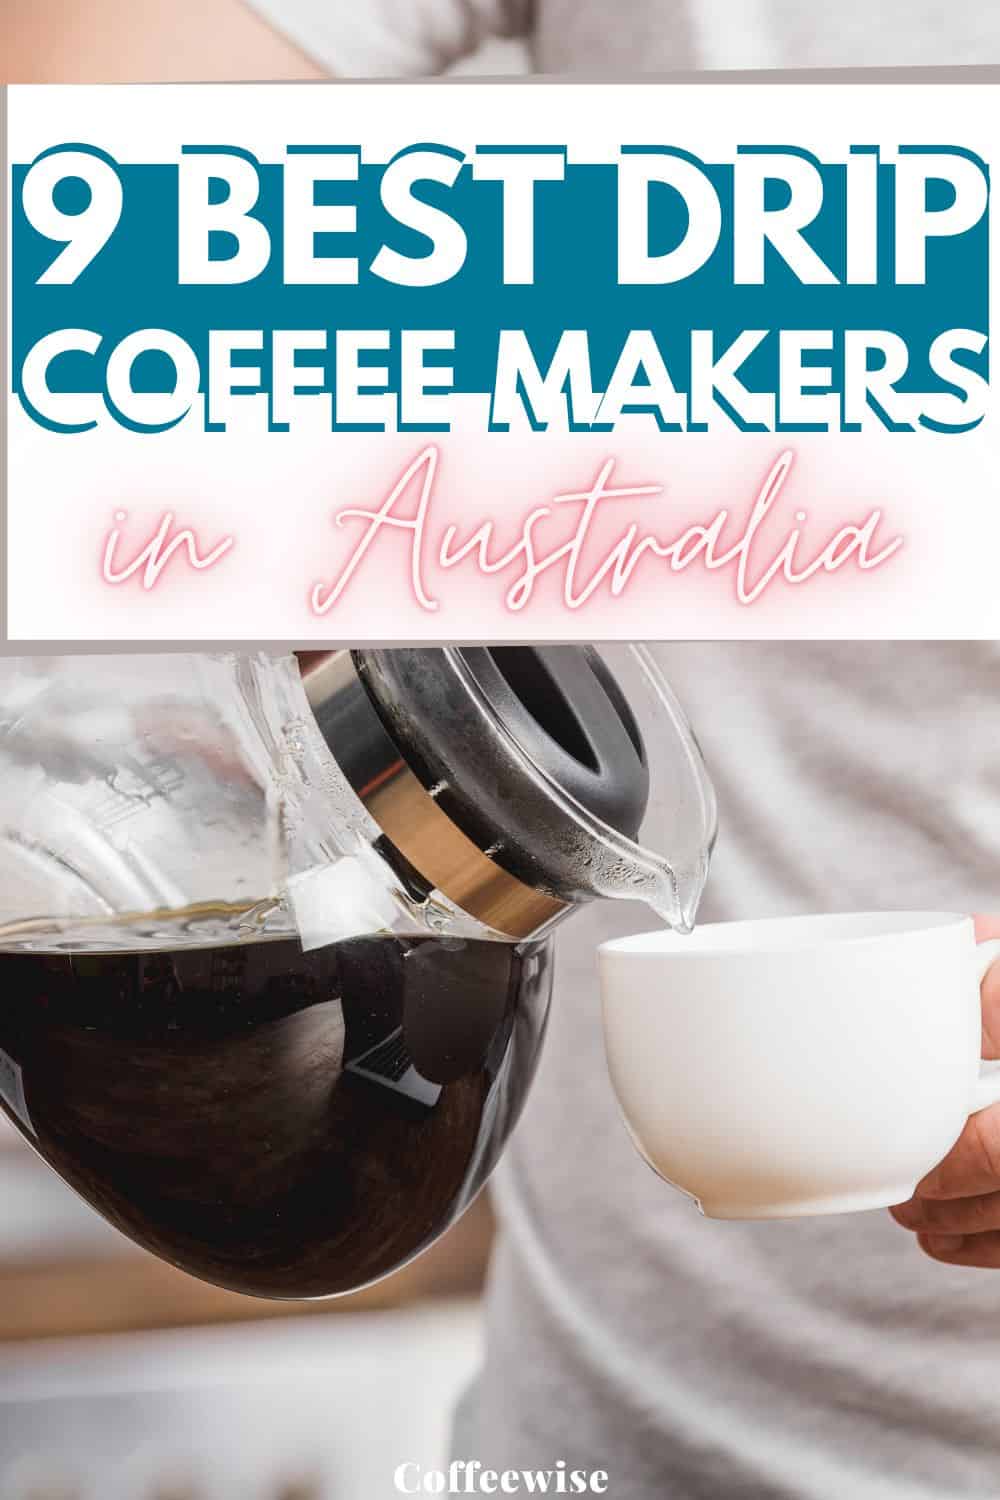 drip pot coffee maker pouring into cup with text overlay "Best drip coffee makers in Australia".